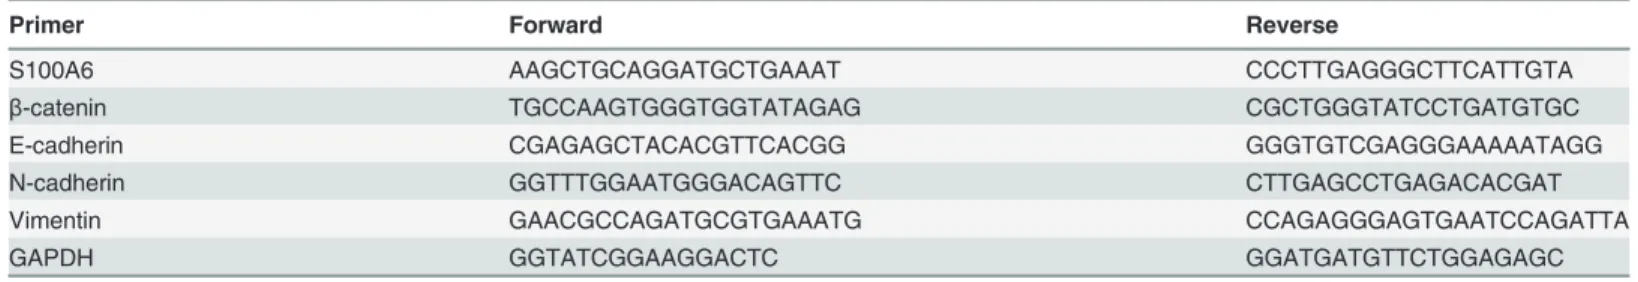 Table 1. Sequences of Primers for Real-time PCR.